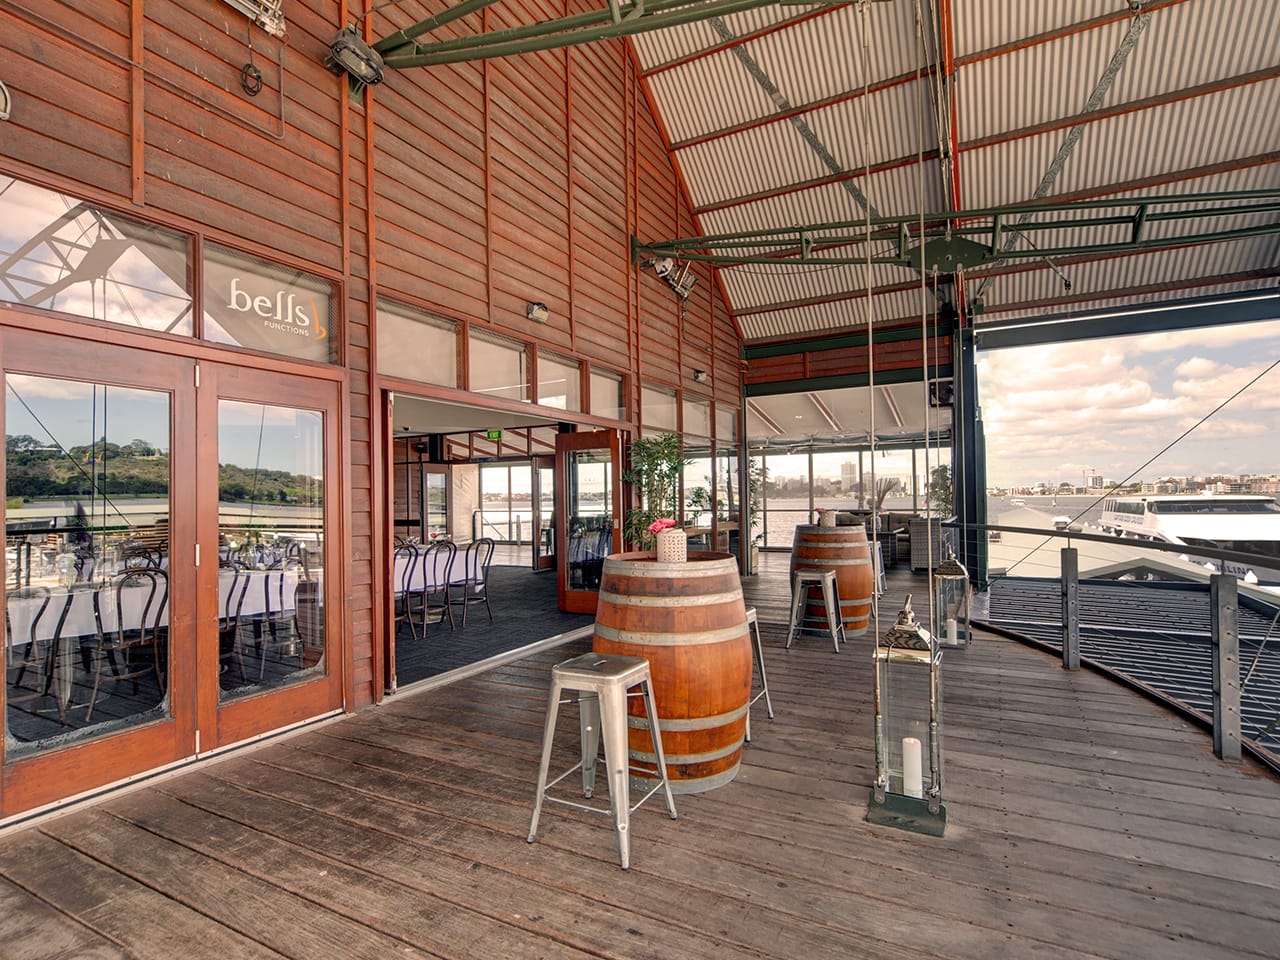 Perth Function Venue Balcony With Wine Casks As Table With Chairs And River Views